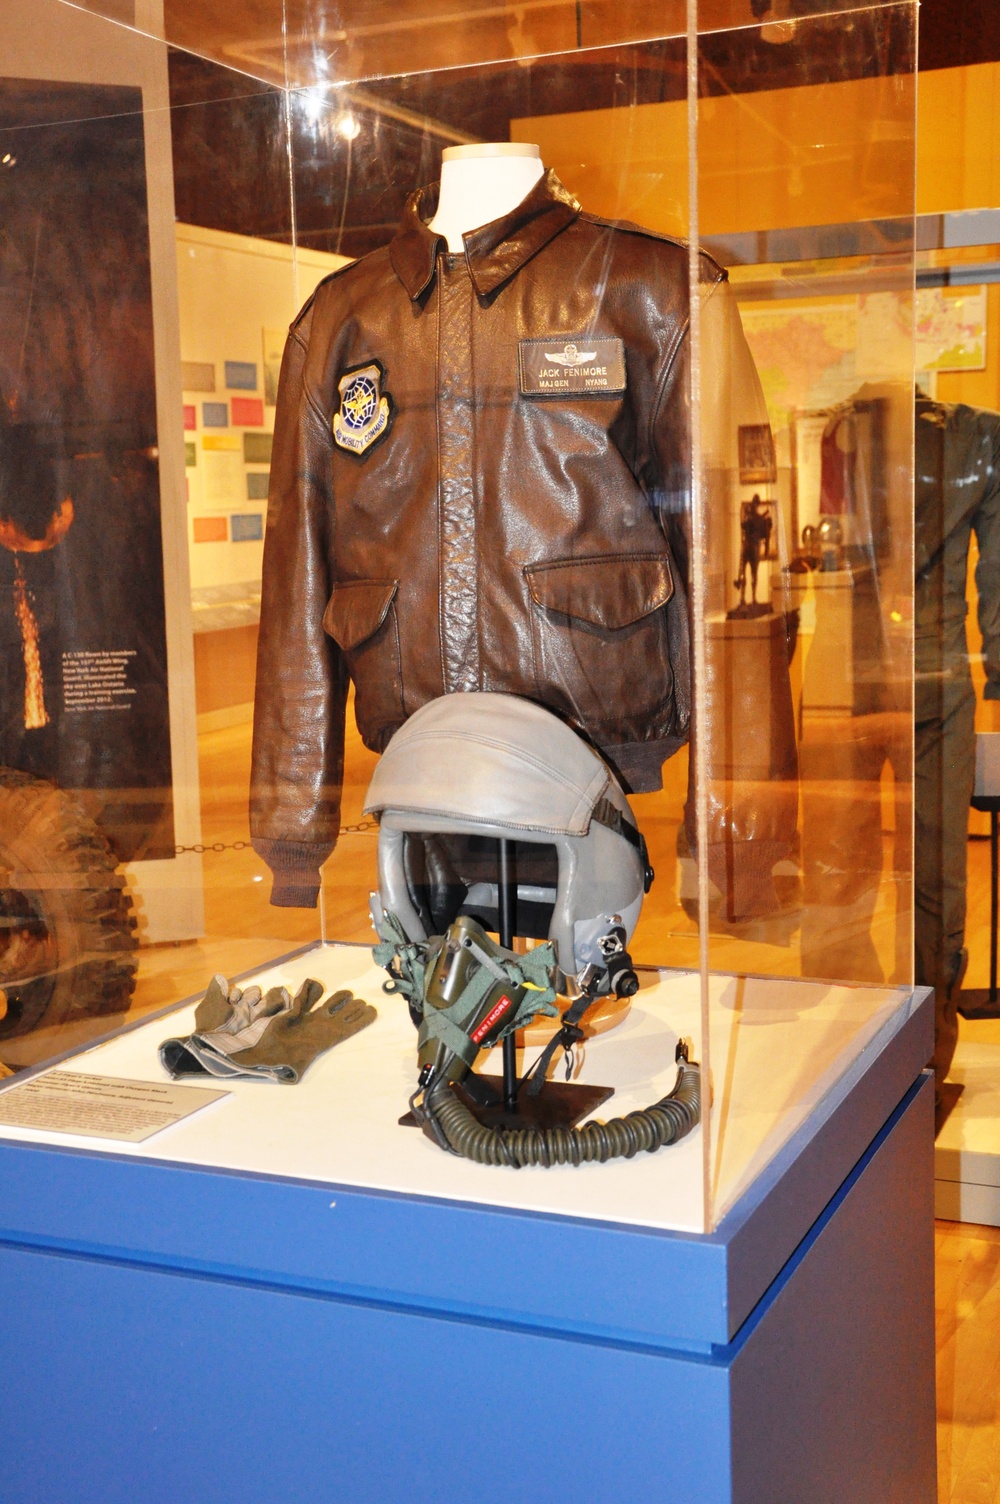 Exhibit highlights history of the New York Air National Guard